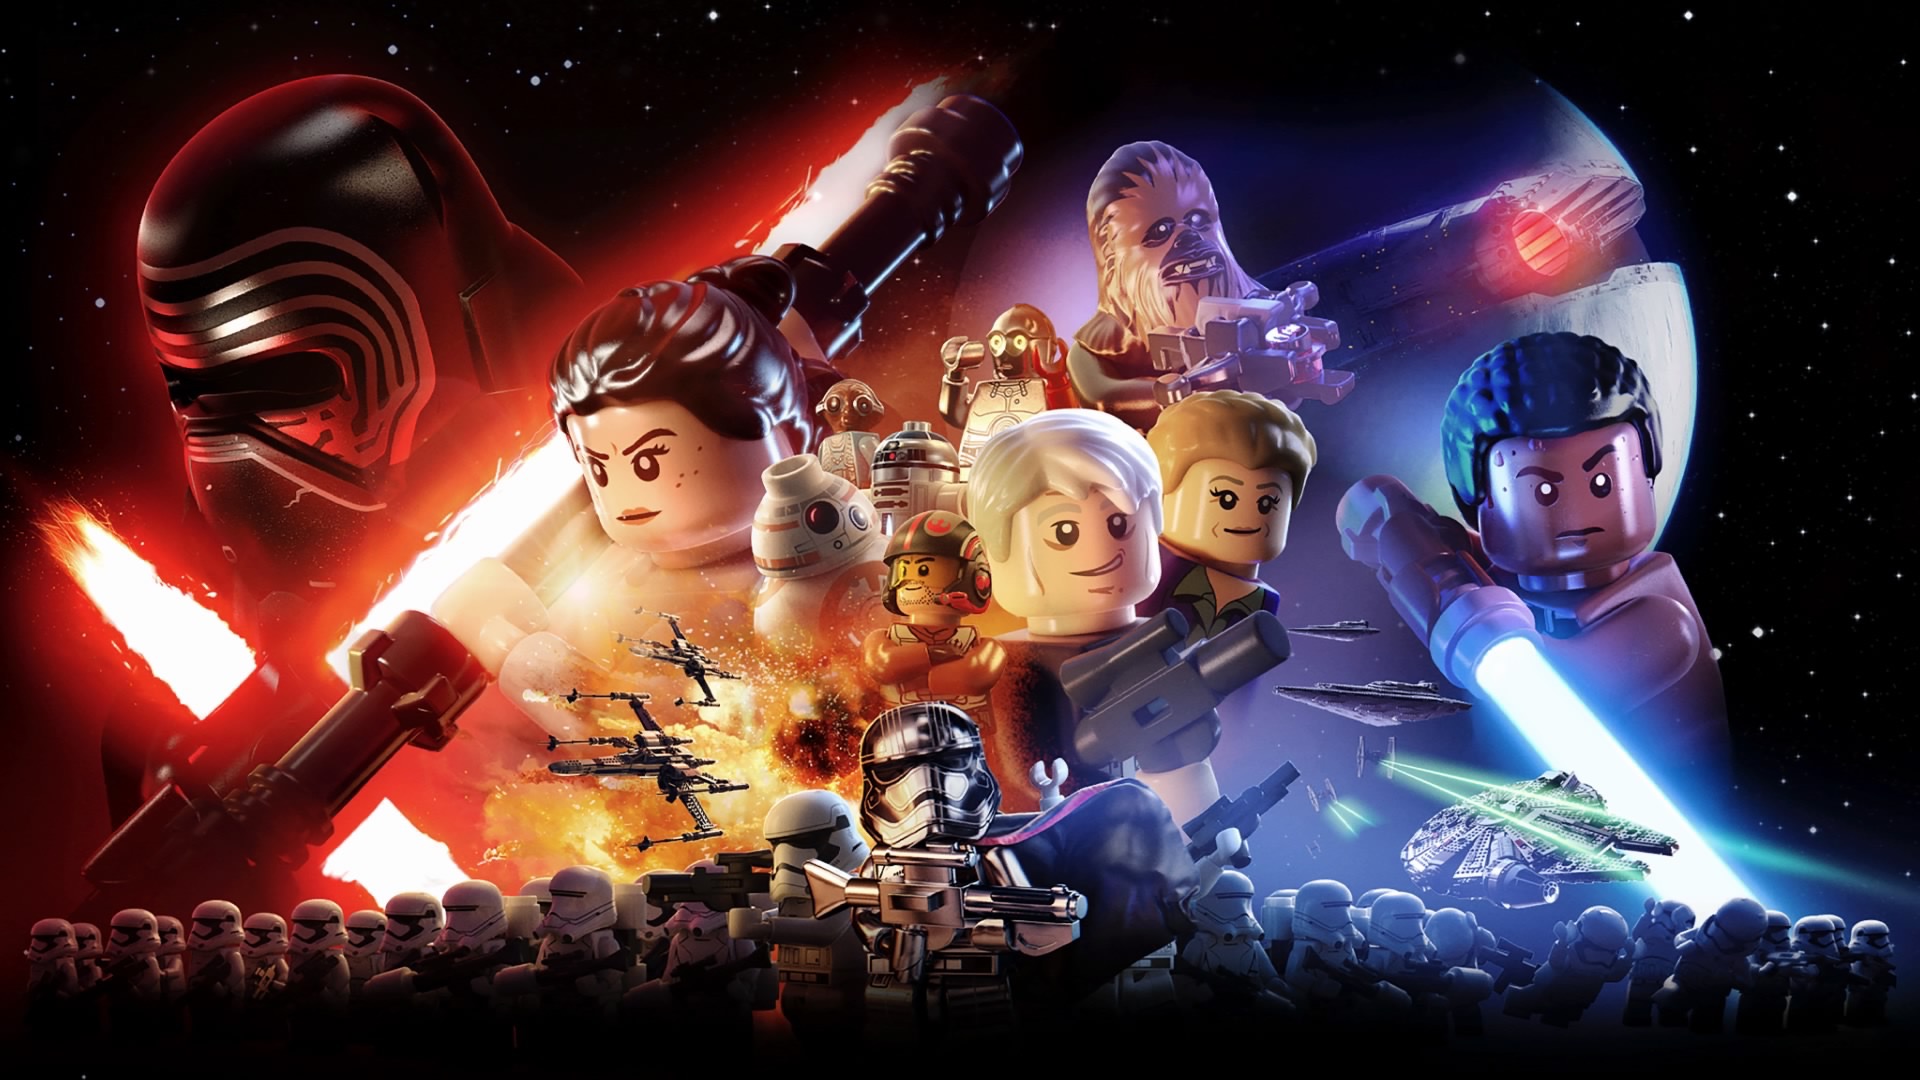 download lego star wars ™ the force awakens